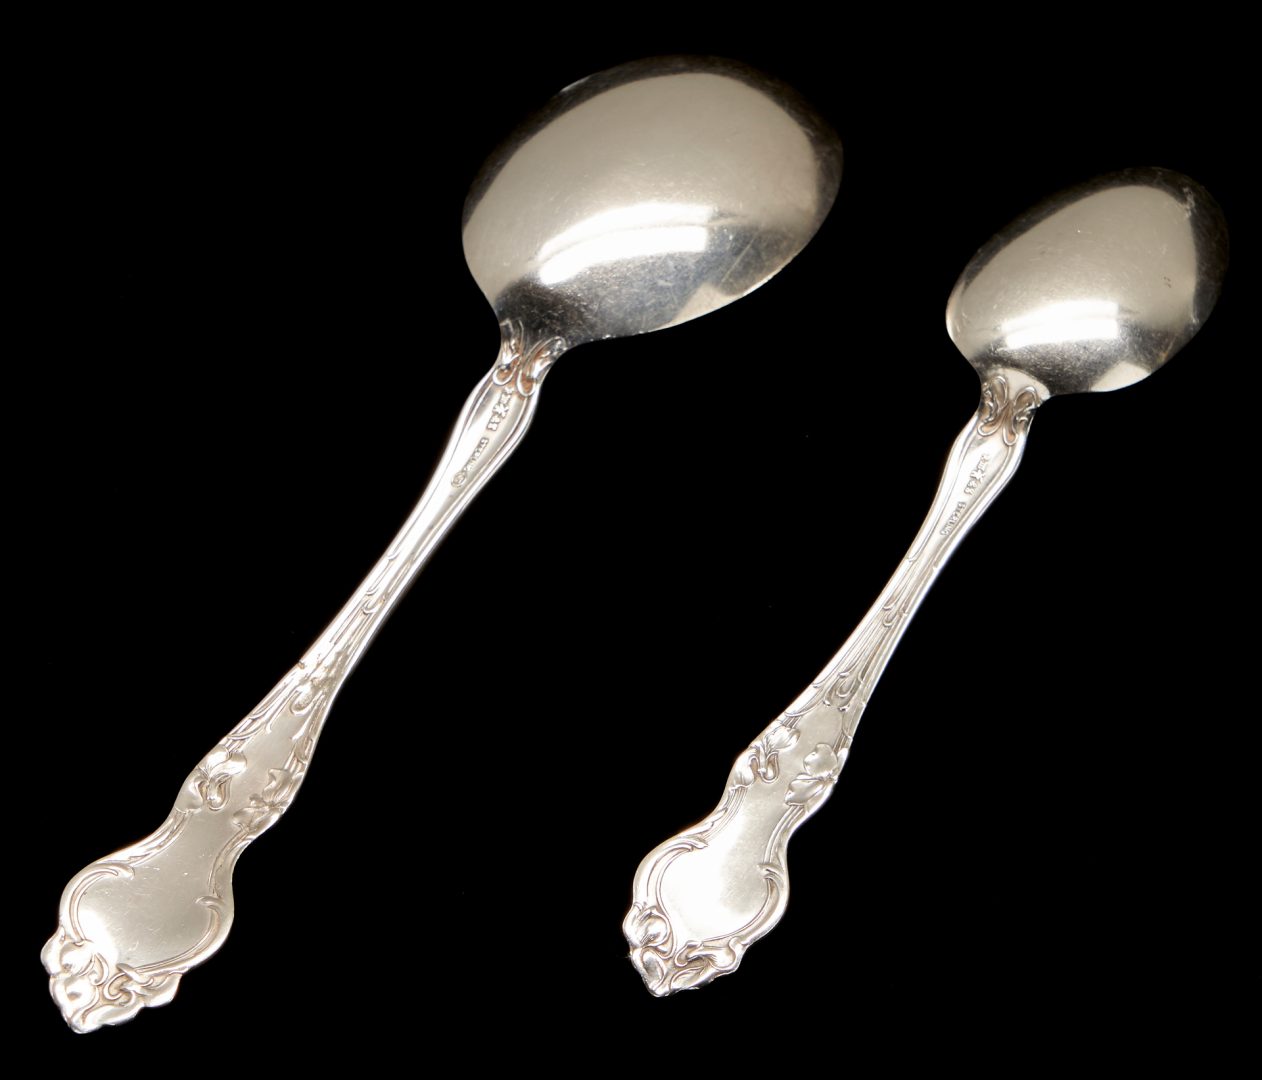 Lot 417: Wallace Violet Sterling Silver Flatware Service for 12 + 2 Serving Items, 107 pcs.